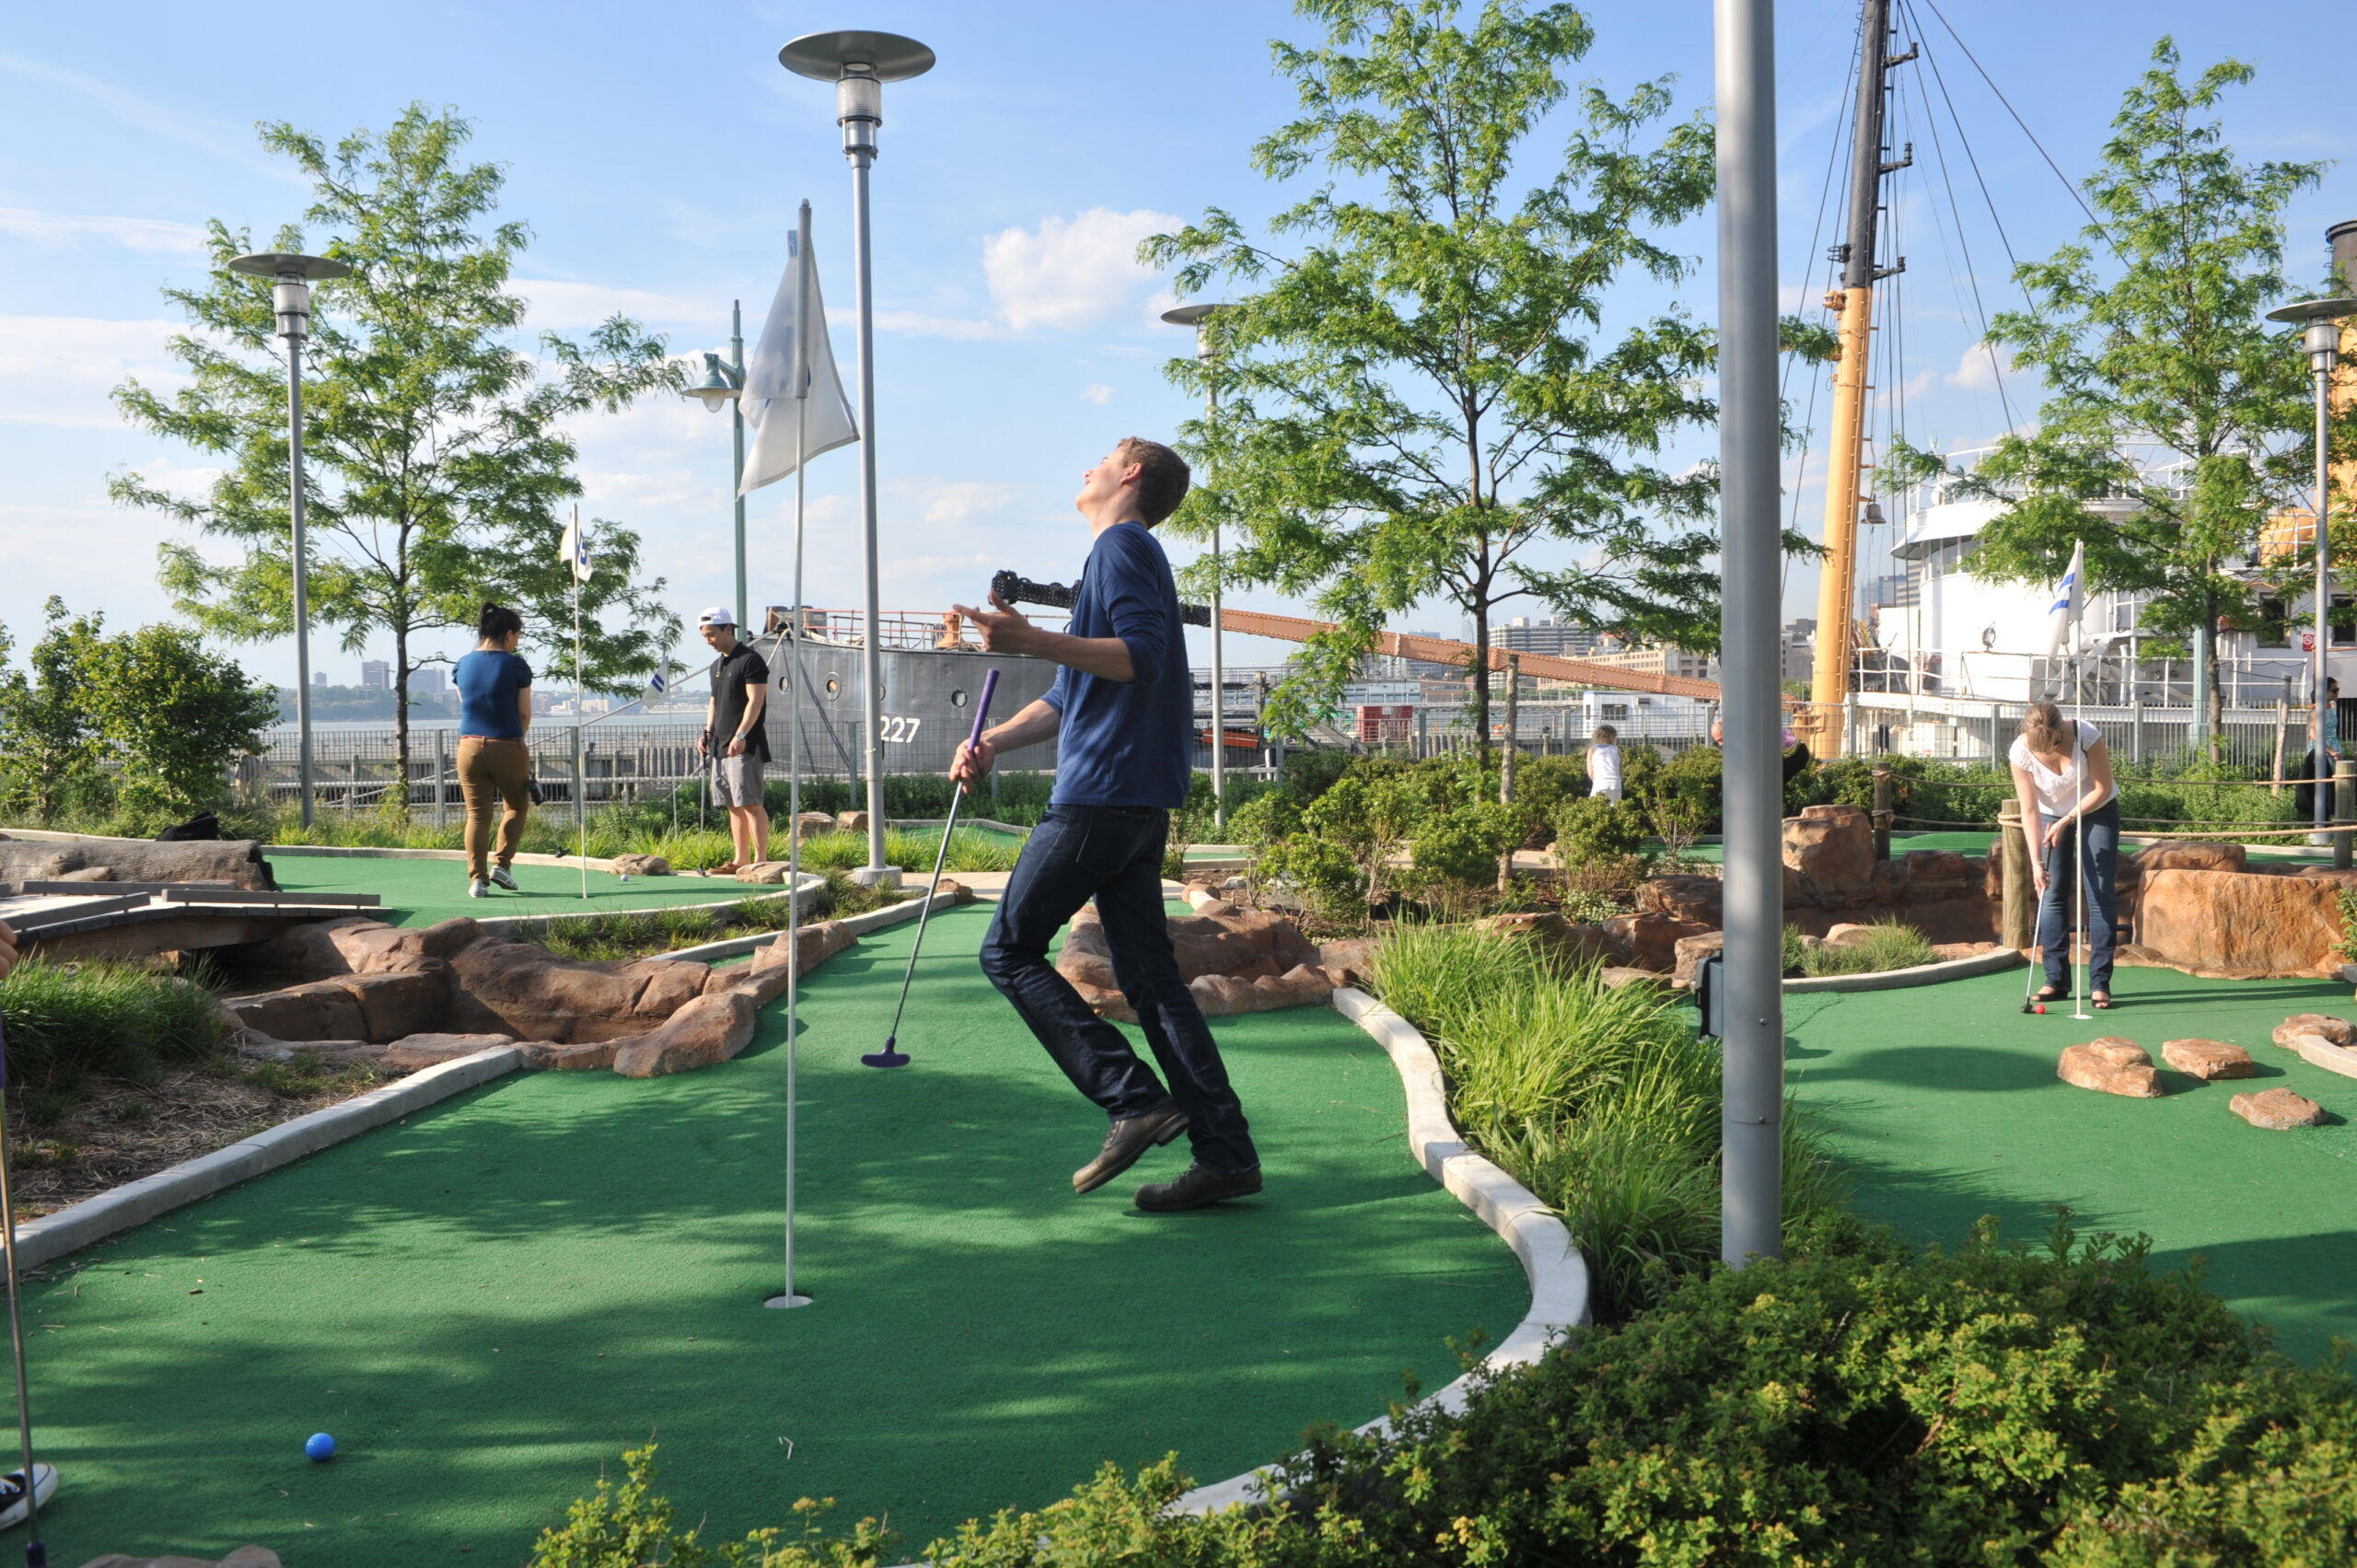 A mini golfer celebrates putting the ball into the hole at Hudson River Park's Pier 25